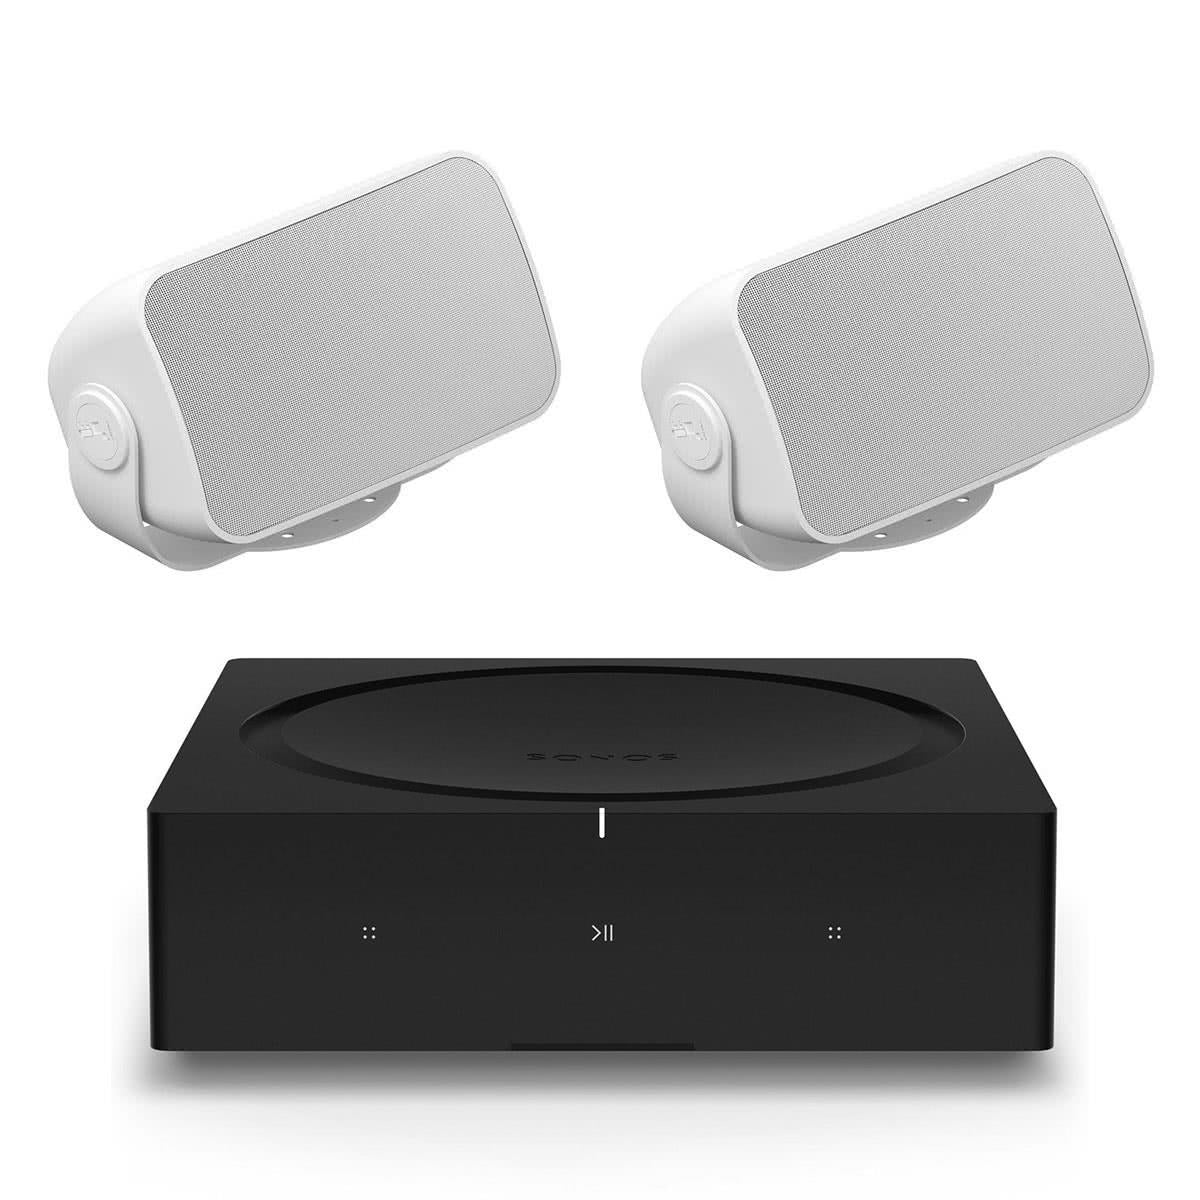 Sonos OUTDRWW1 Outdoor Architectural Speaker Pair with Amp Wireless Hi-Fi Player (White)